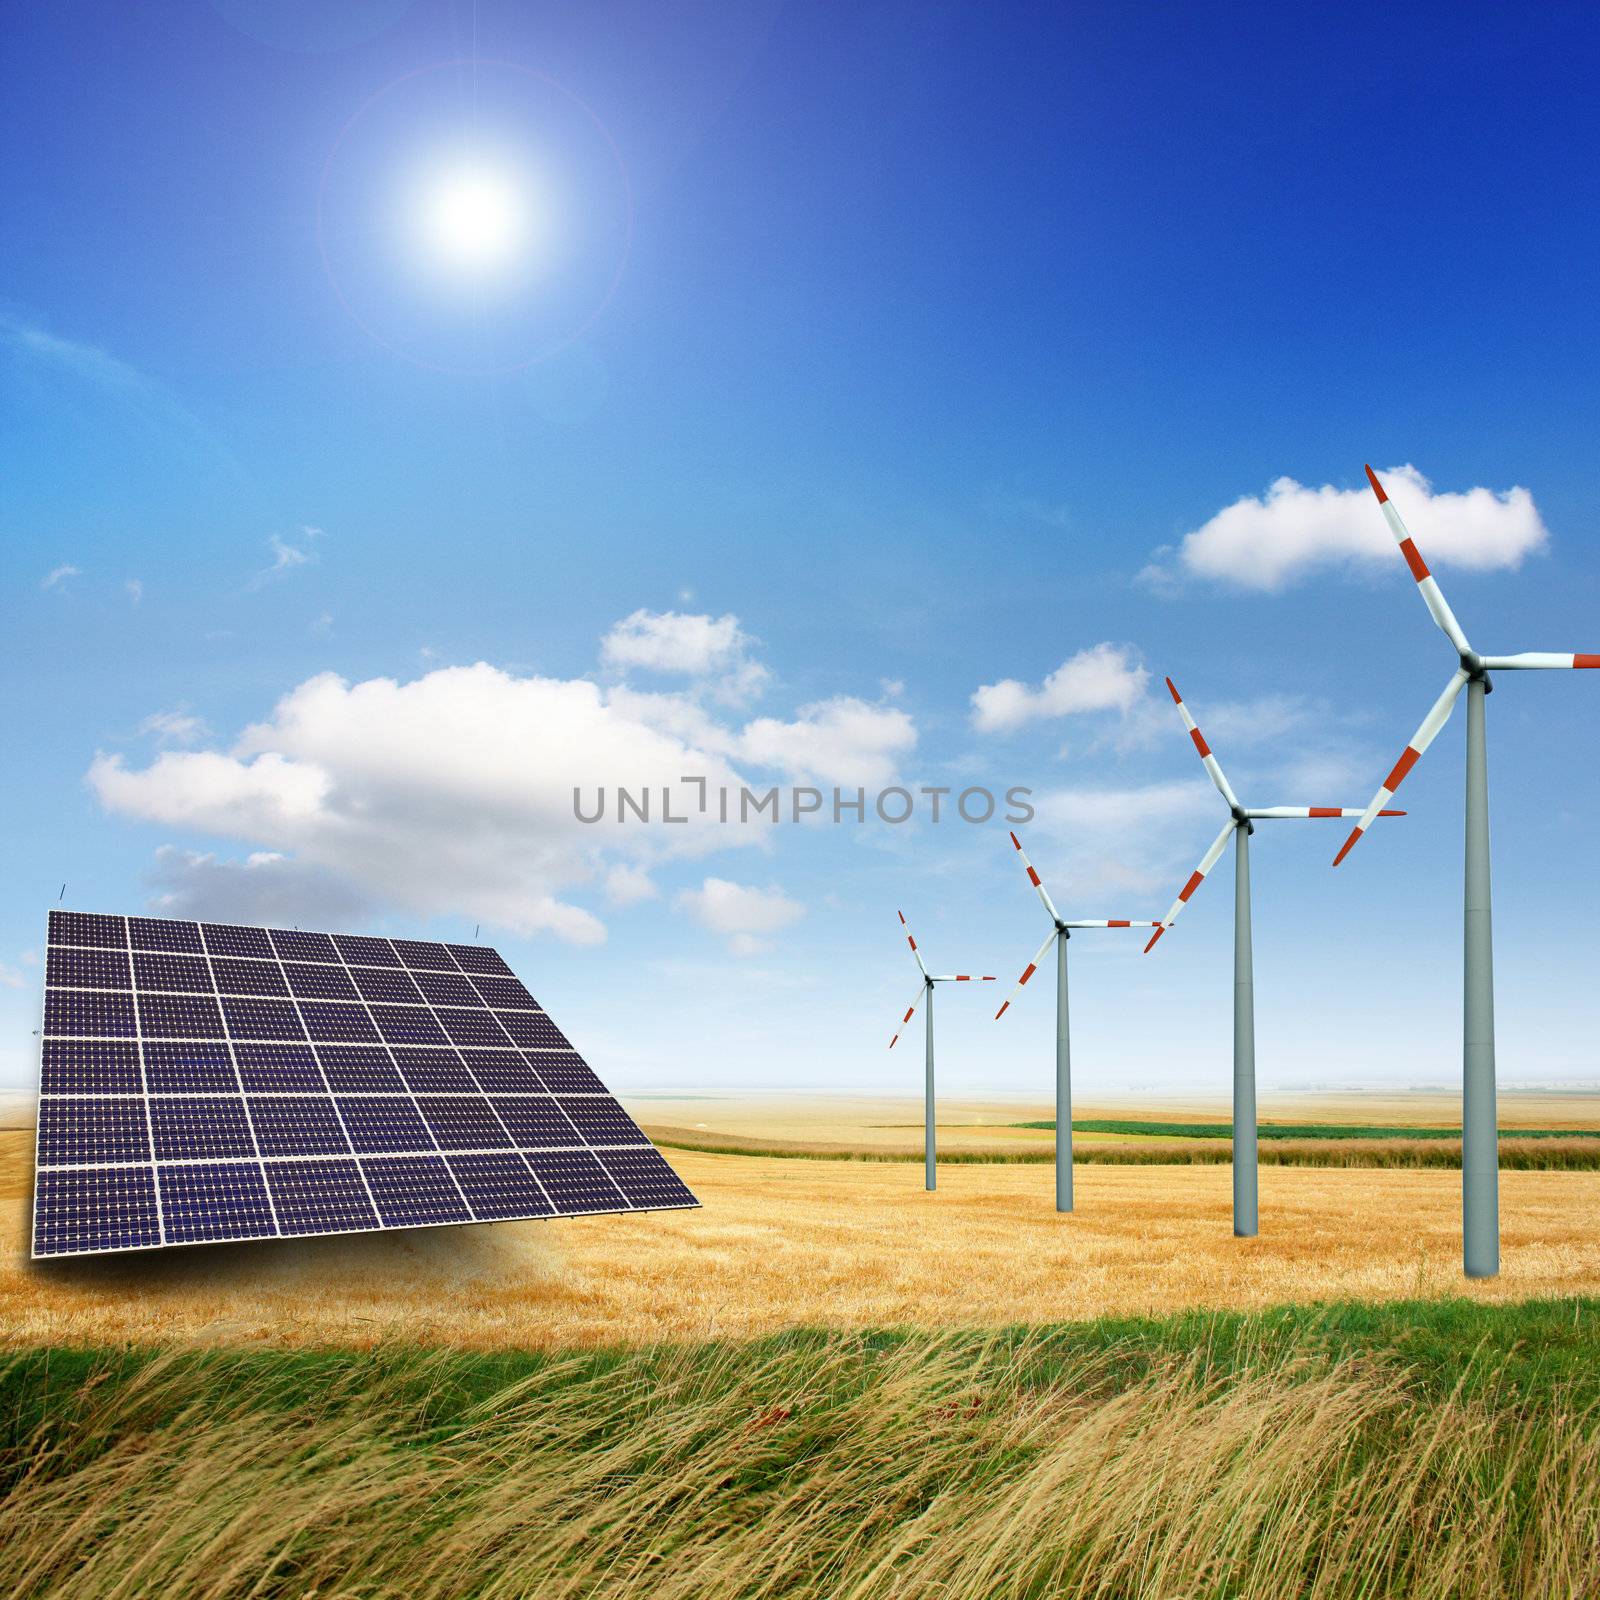 Wind turbines and solar panels generate electricity